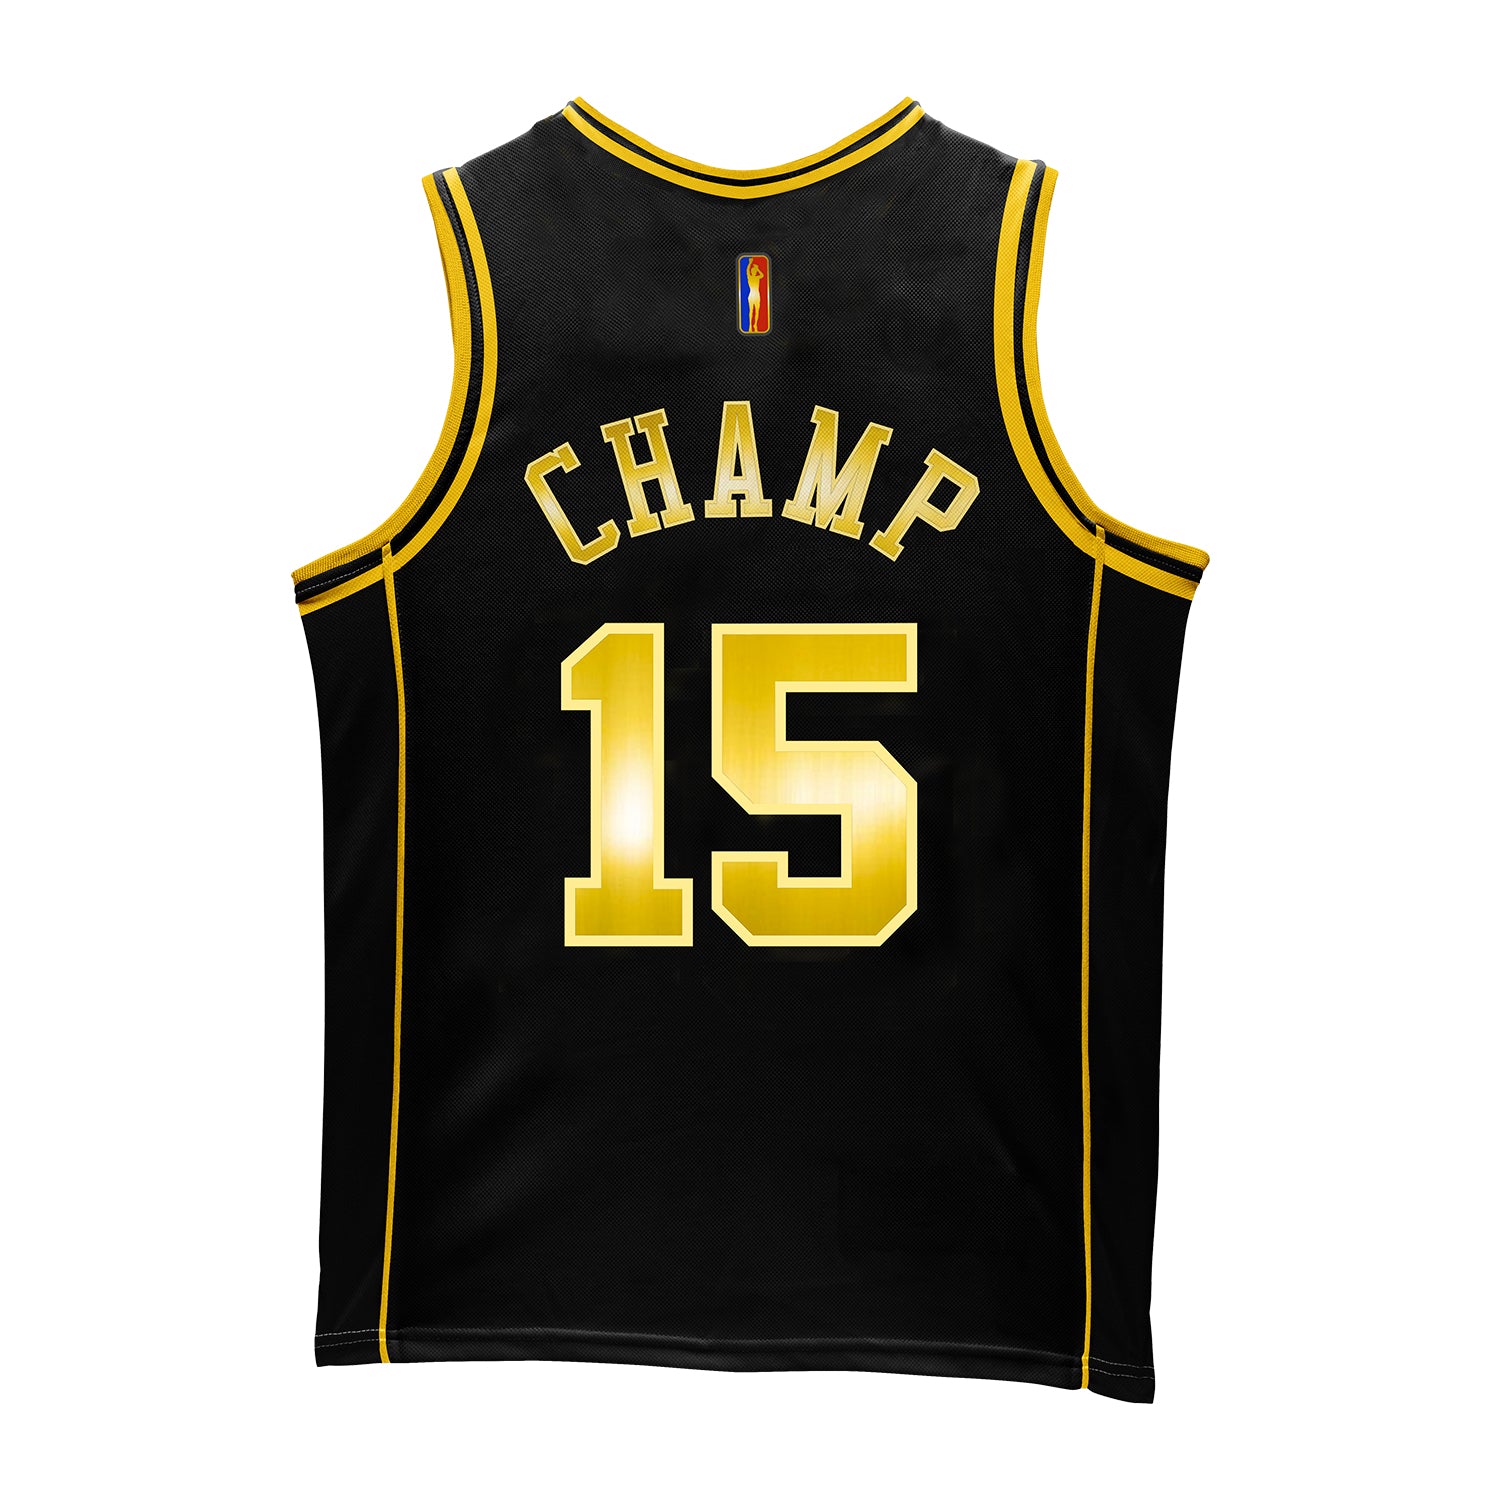 Suga Sean Limited Edition Unranked Champ Jersey X-Large